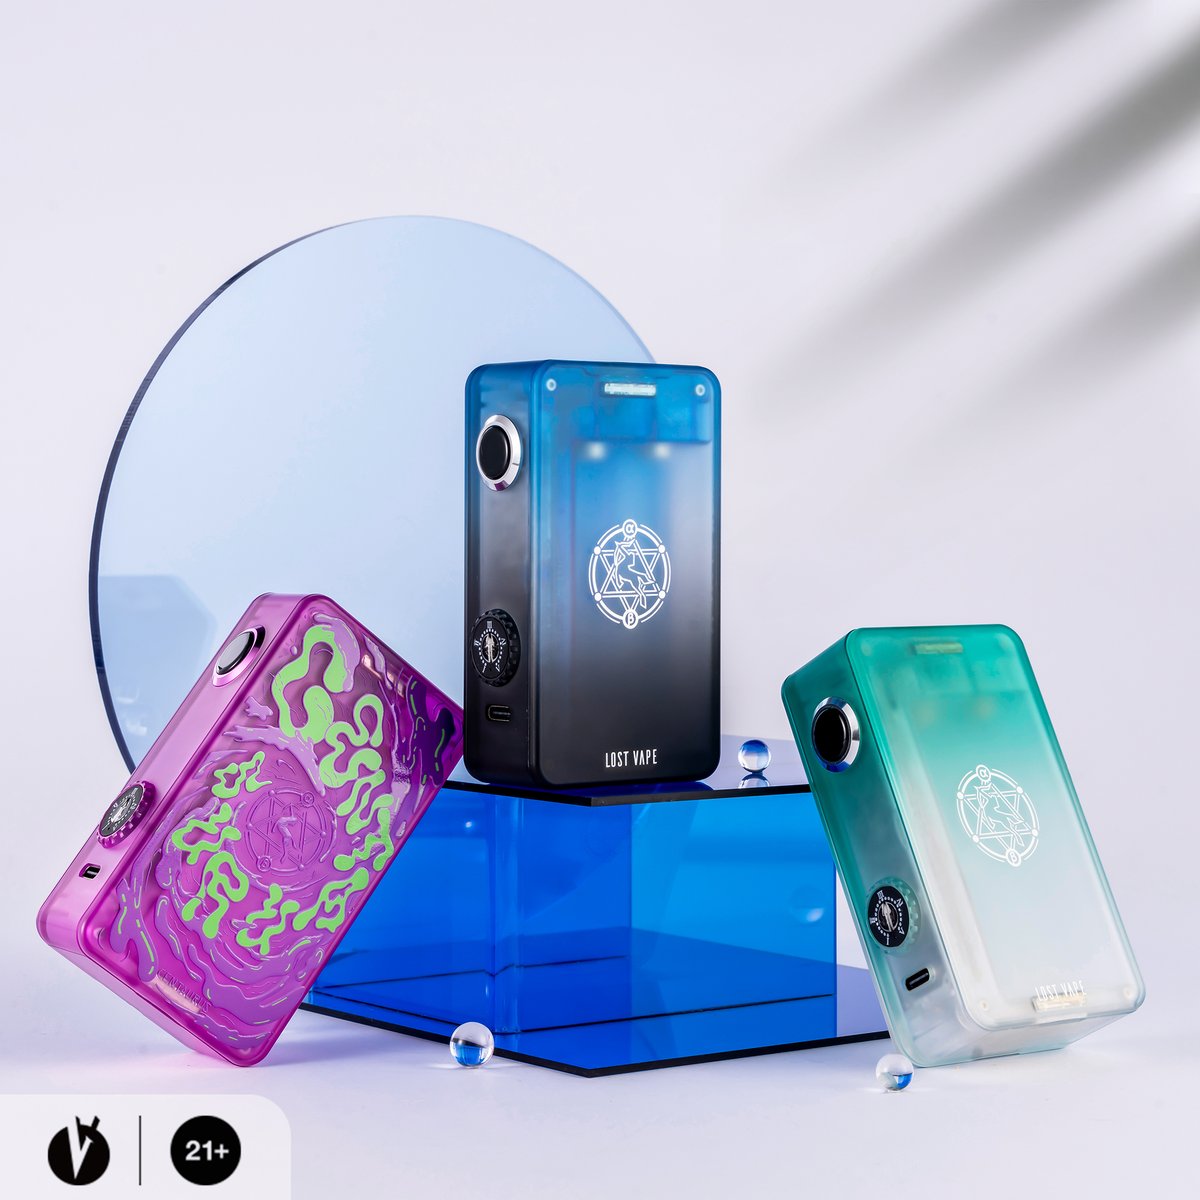 Lost Vape Centaurus P200 Box Mod Available now🔥👇 sourcemore.com/lost-vape-cent… ⚠ Warning: The device is used with e-liquid which contains addictive chemical nicotine. For Adult use only. #sourcemore #sourcemoreofficial #Lostvape #Centaurusp200 #vapetricks